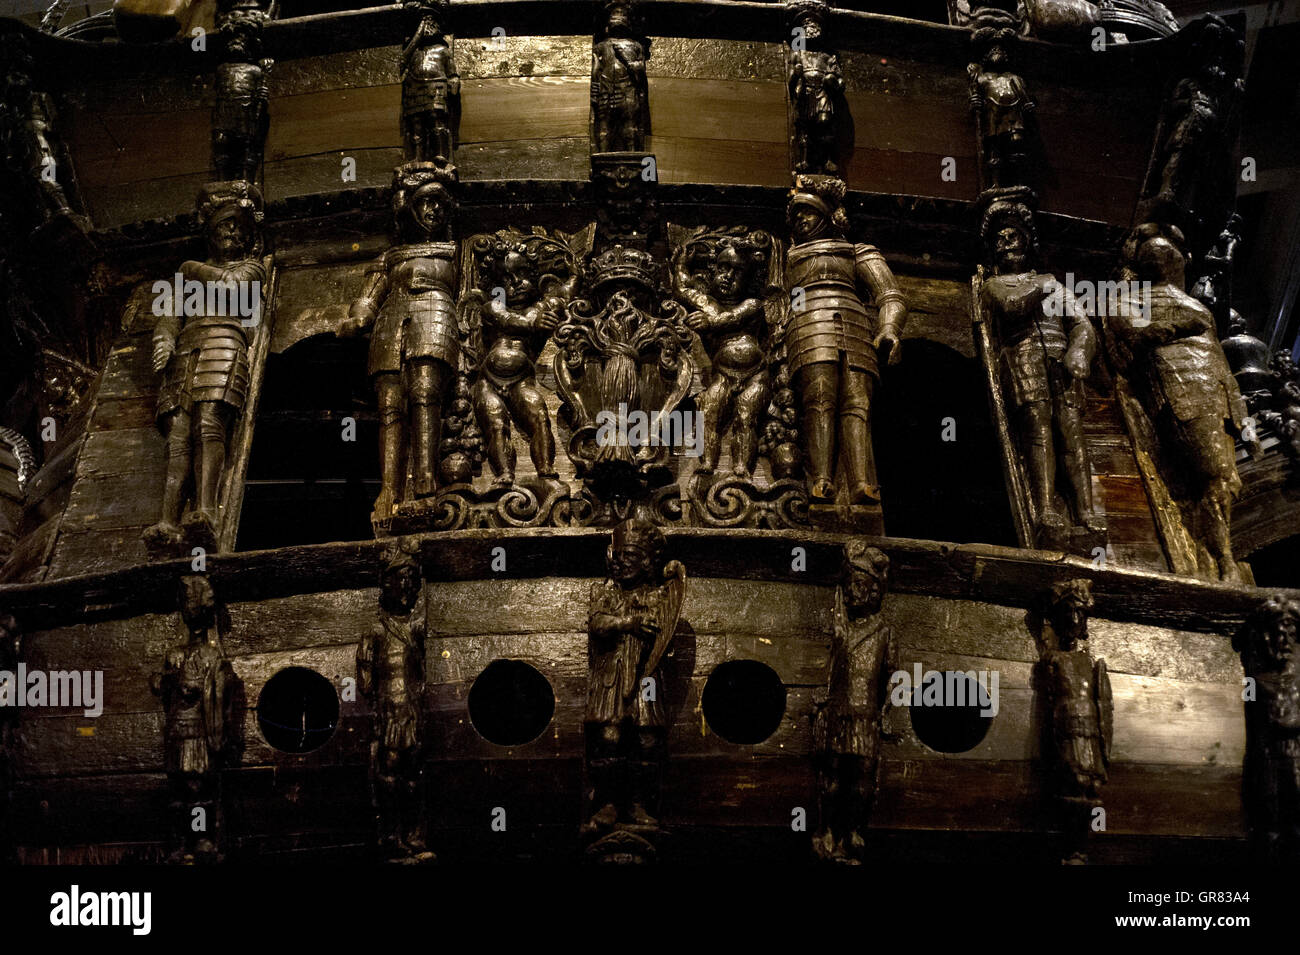 Warship Vasa. Built at 1626-1628 on the orders of the King of Sweden Gustavus Adolphus. Stern. Detail. Vasa Museum. Stockholm. Sweden. Stock Photo